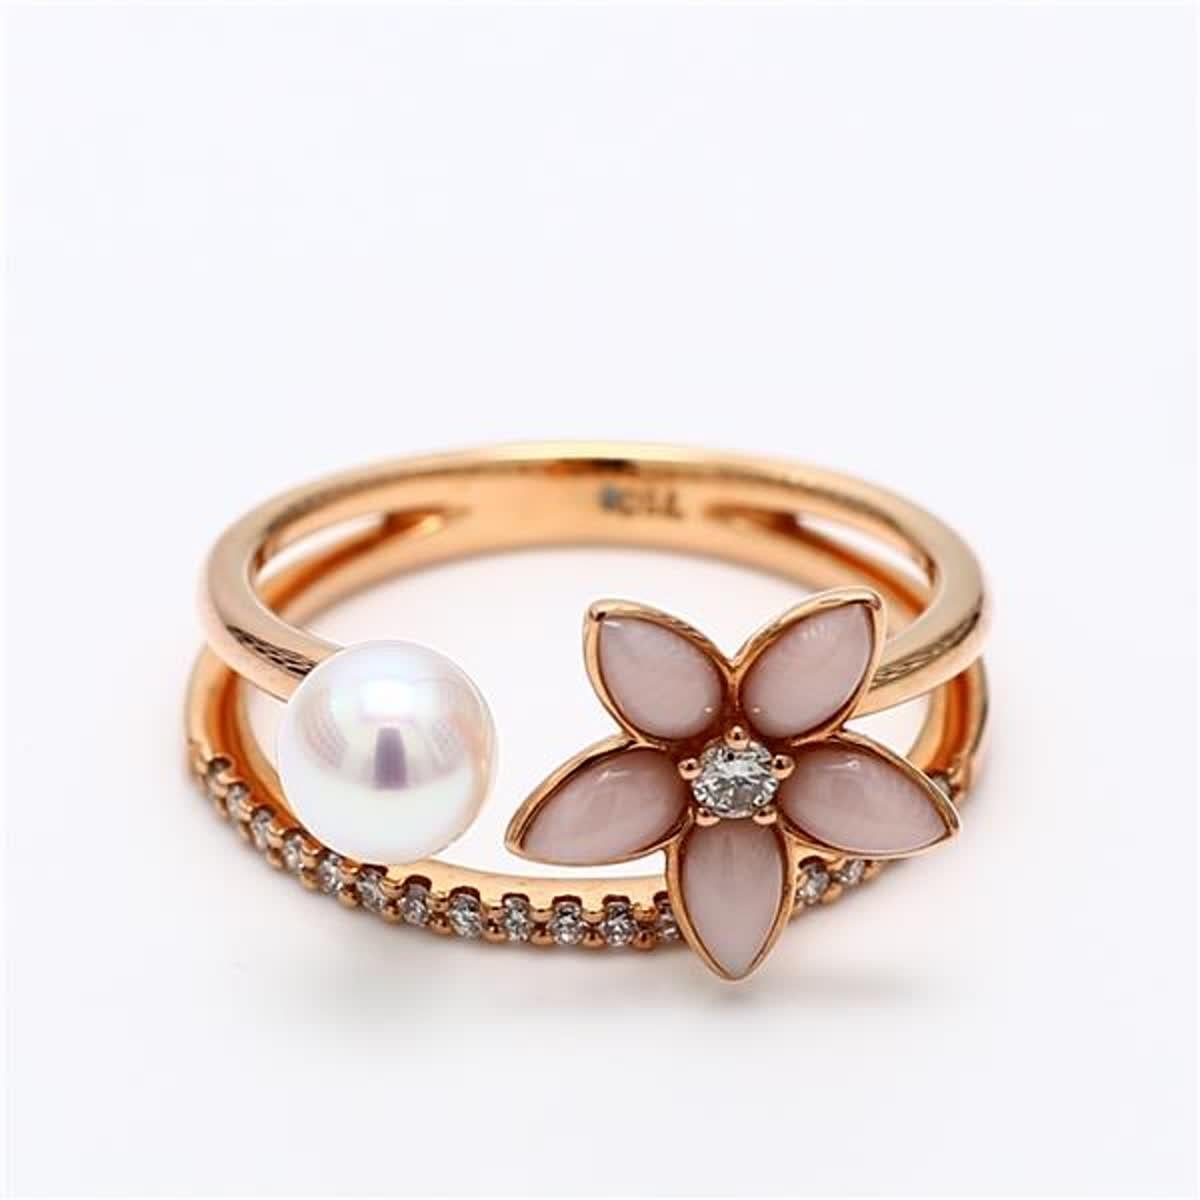 RareGemWorld's classic fashion ring. Mounted in a beautiful 18K Rose Gold setting with a natural white pearl, pink corralium secundum, and natural round white diamond melee. This ring is guaranteed to impress and enhance your personal